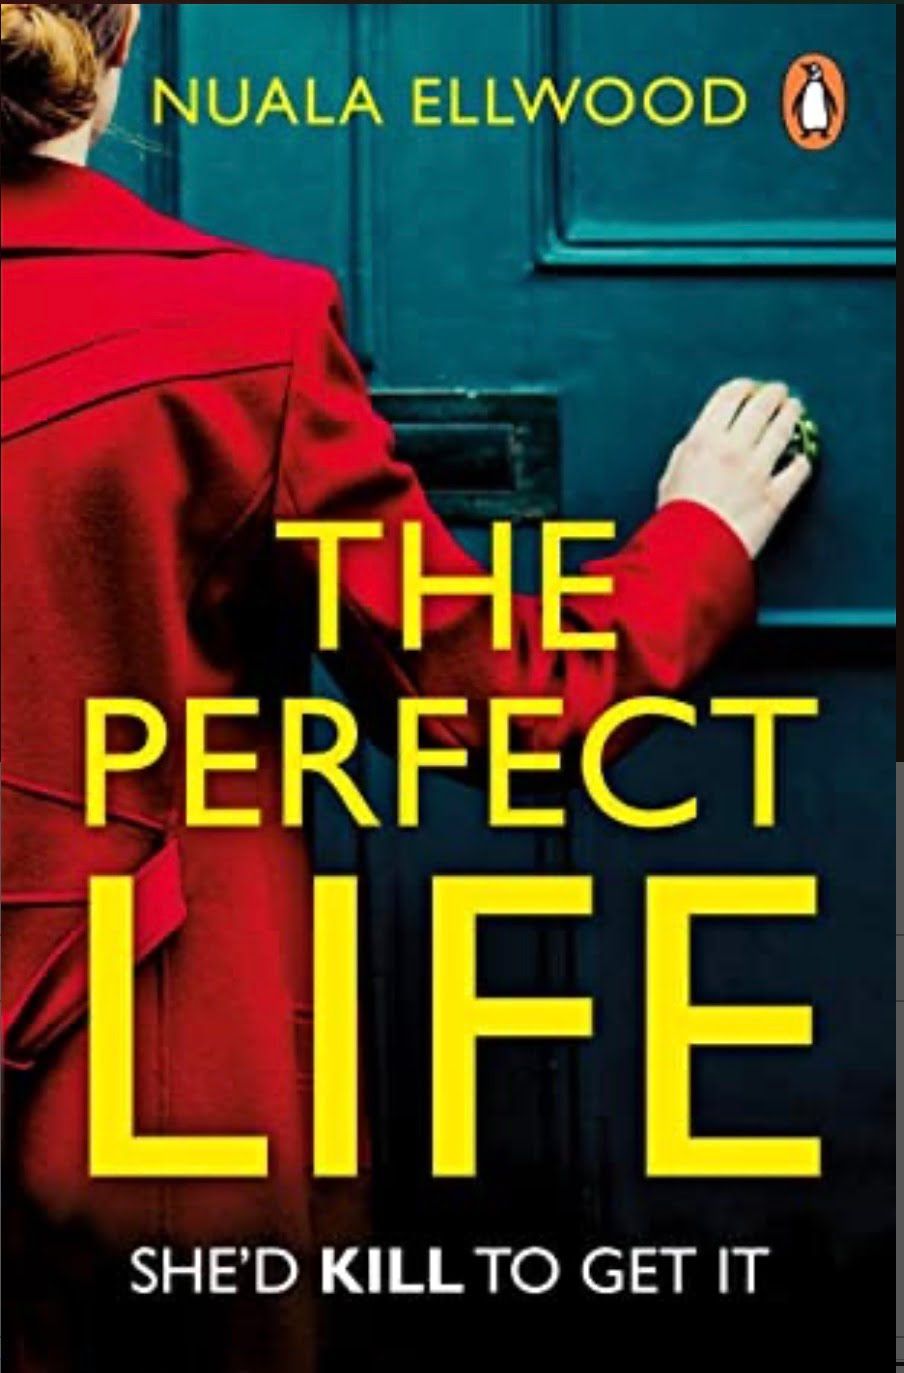 THE PERFECT LIFE BY NUALA ELLWOOD – BOOK REVIEW